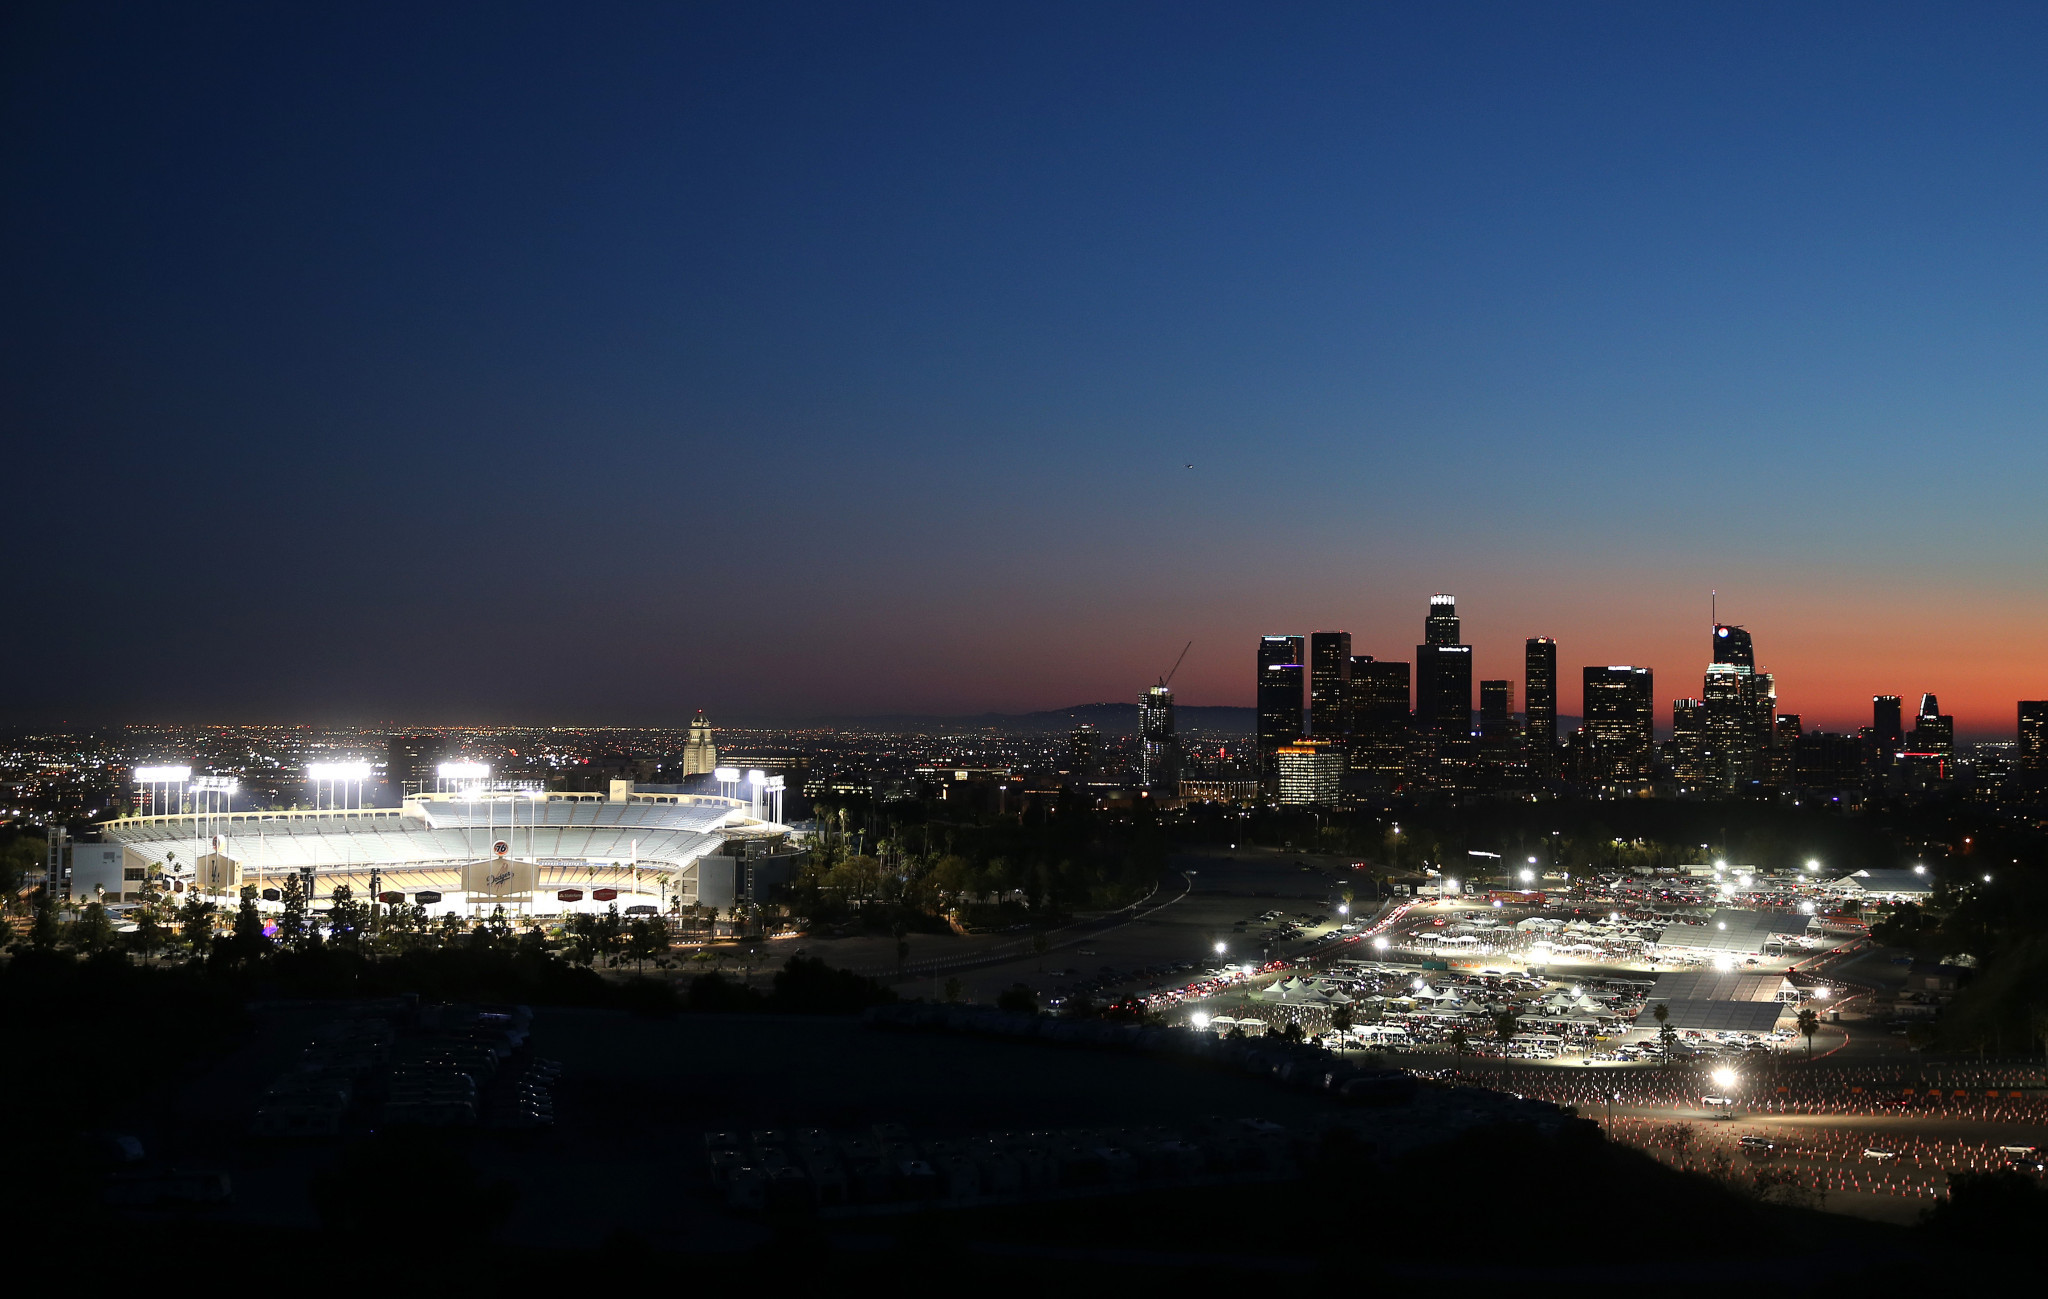 Los Angeles City Council passes Games Agreement for 2028 Olympics